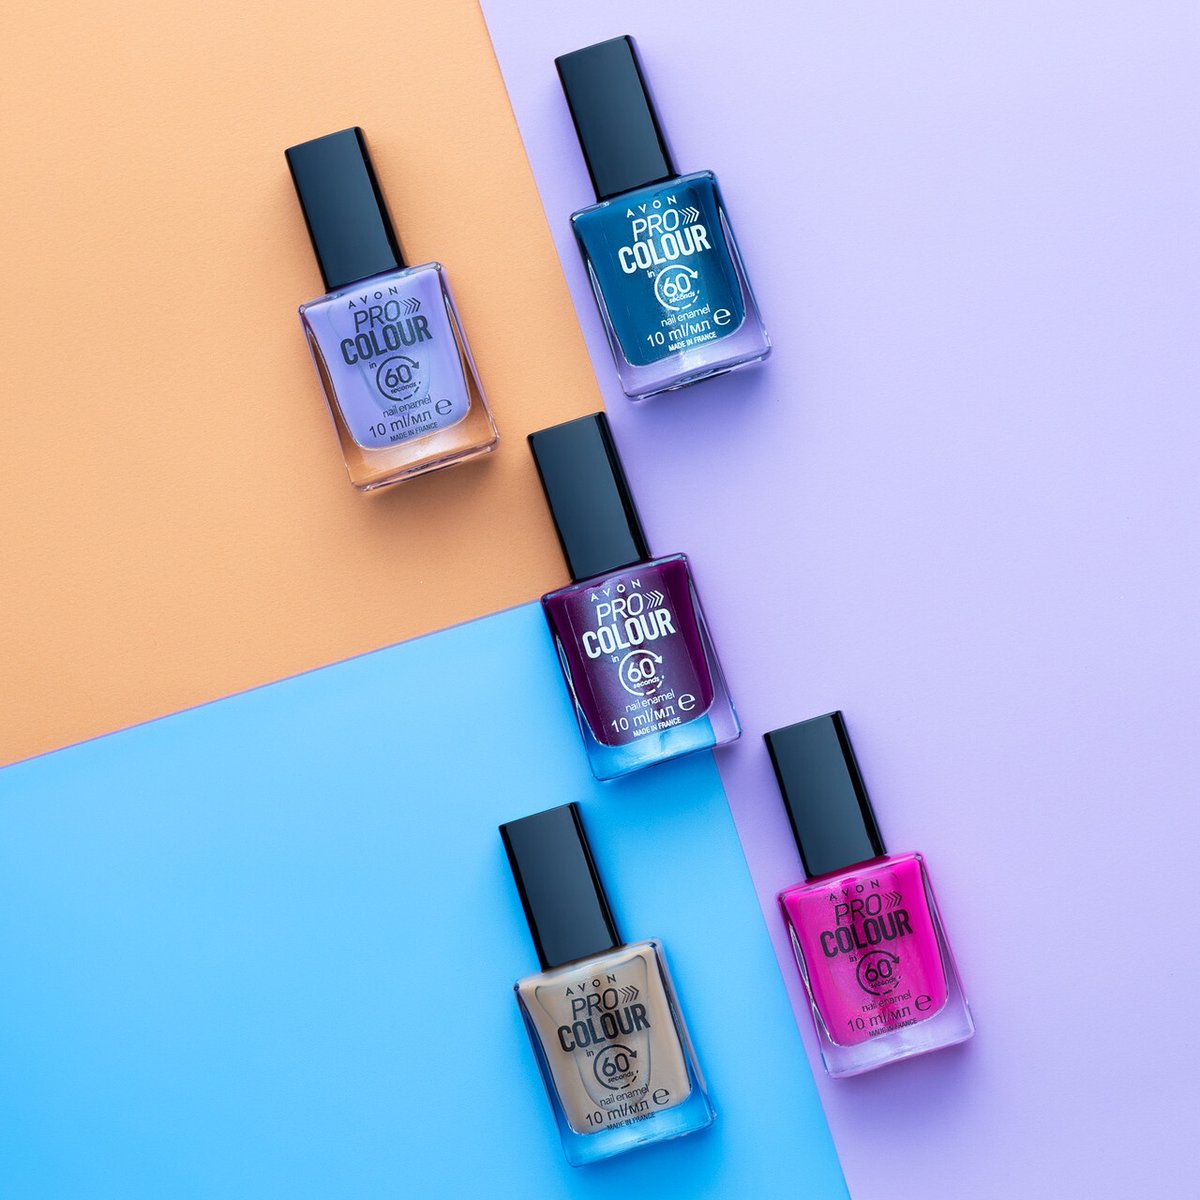 Be sure that when painting your nails you apply a base coat and a top coat! 💅
It's totally worth it to make your polish last a whole lot longer! 😃
wu.to/Yxulnj
#BaseCoat #TopCoat #Avon